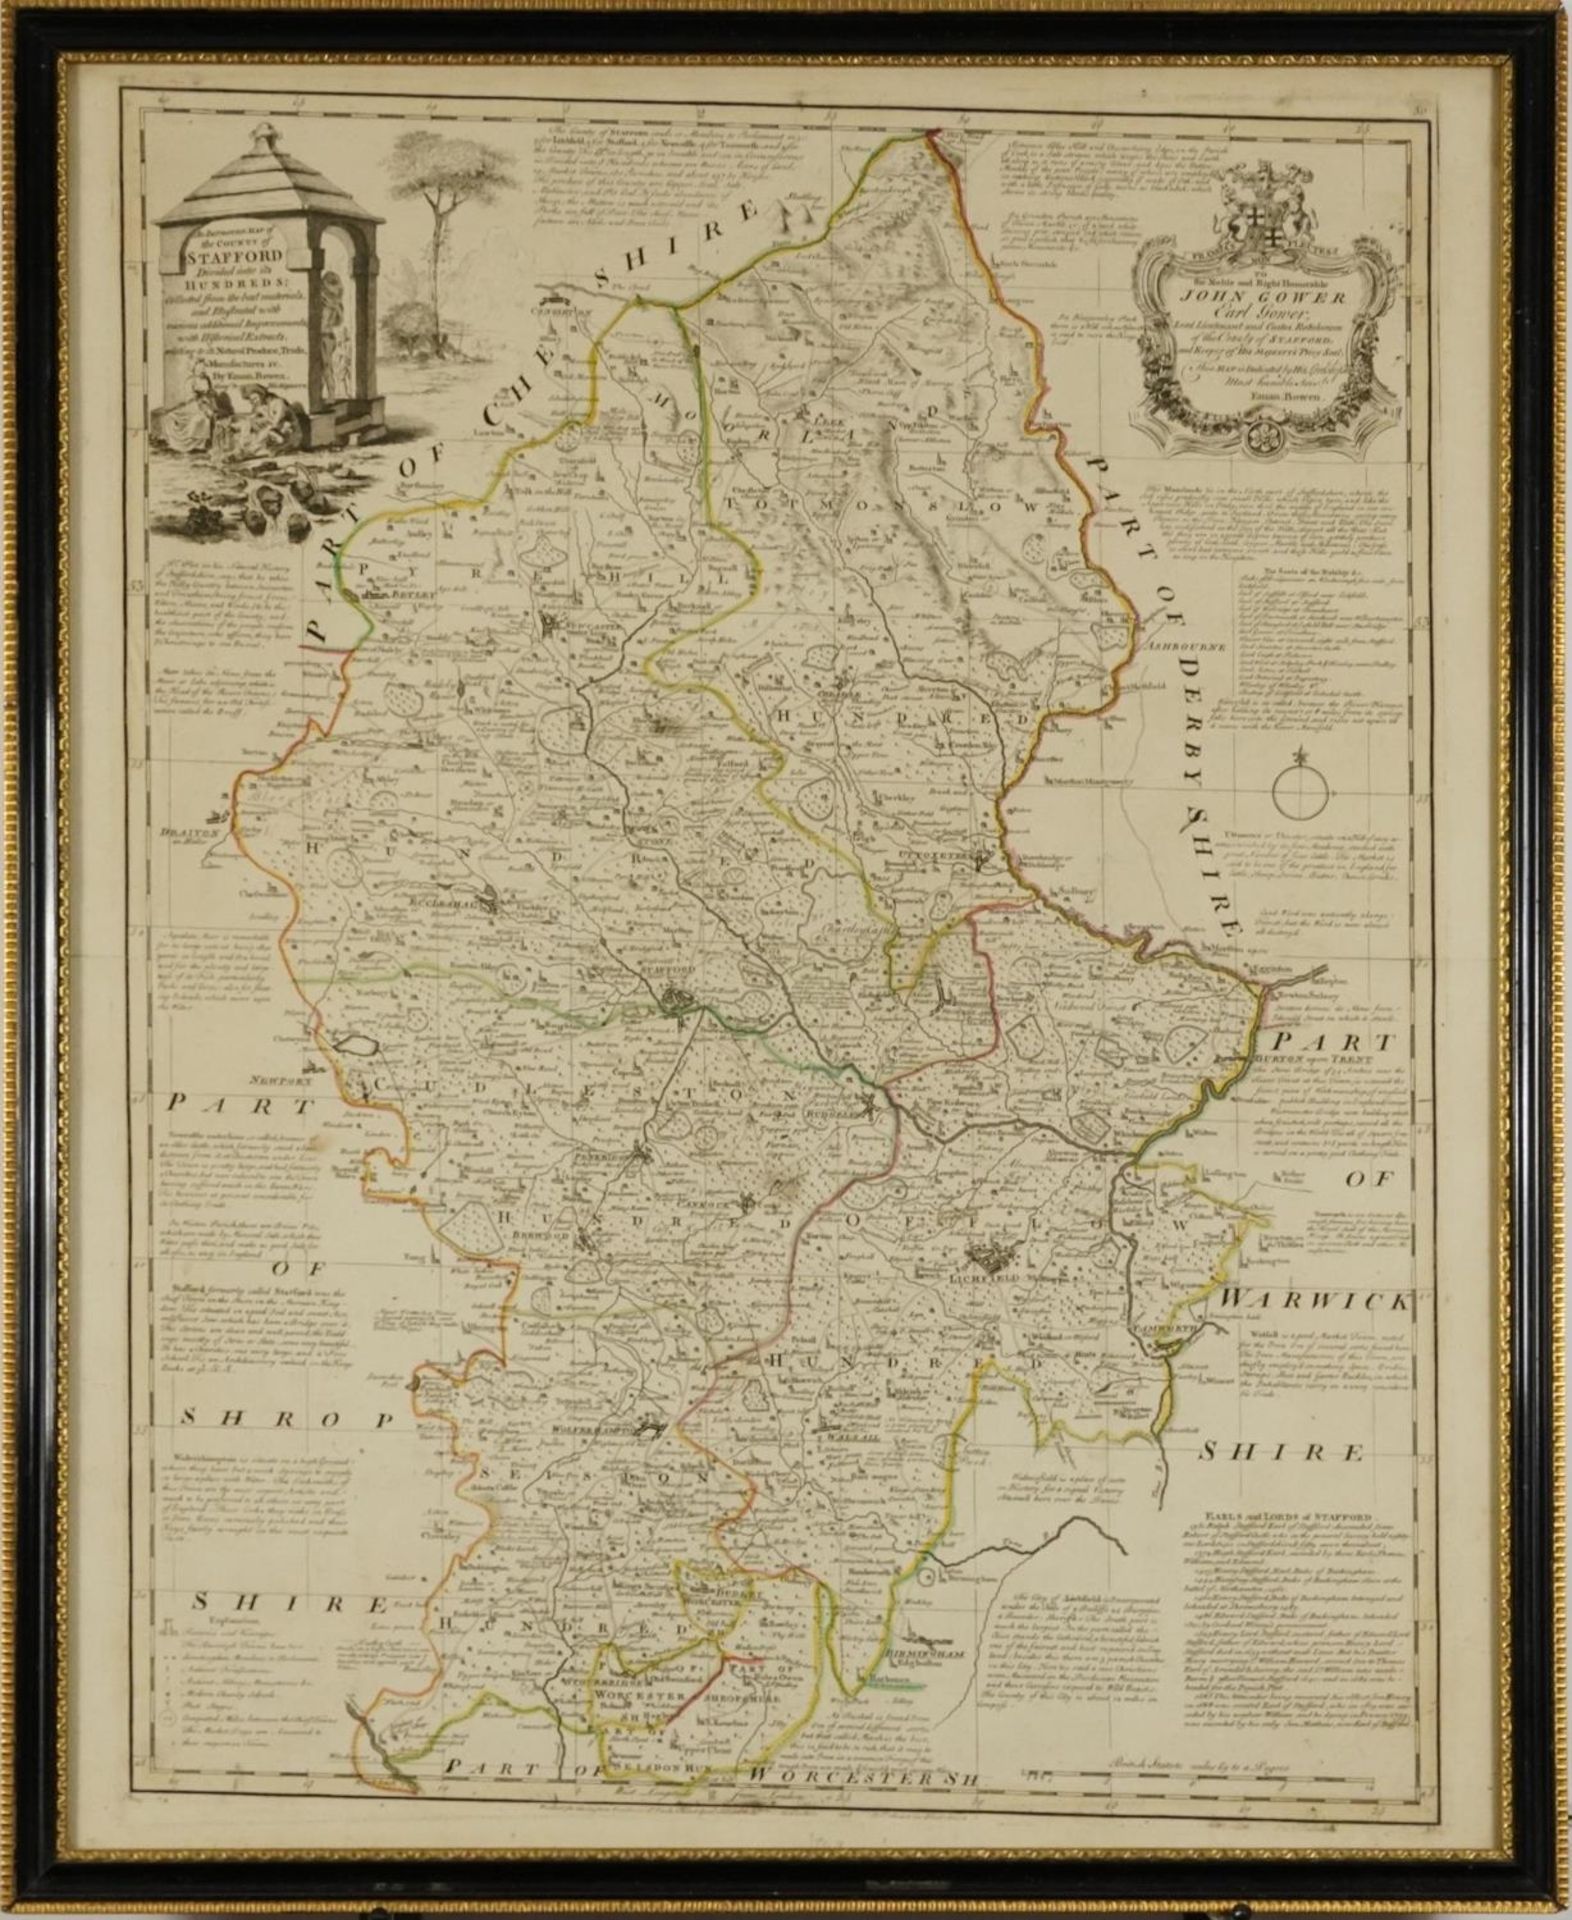 An Improved Map of the County of Stafford, hand coloured antique map by Emmanuel Bowen, The Graves - Image 2 of 5